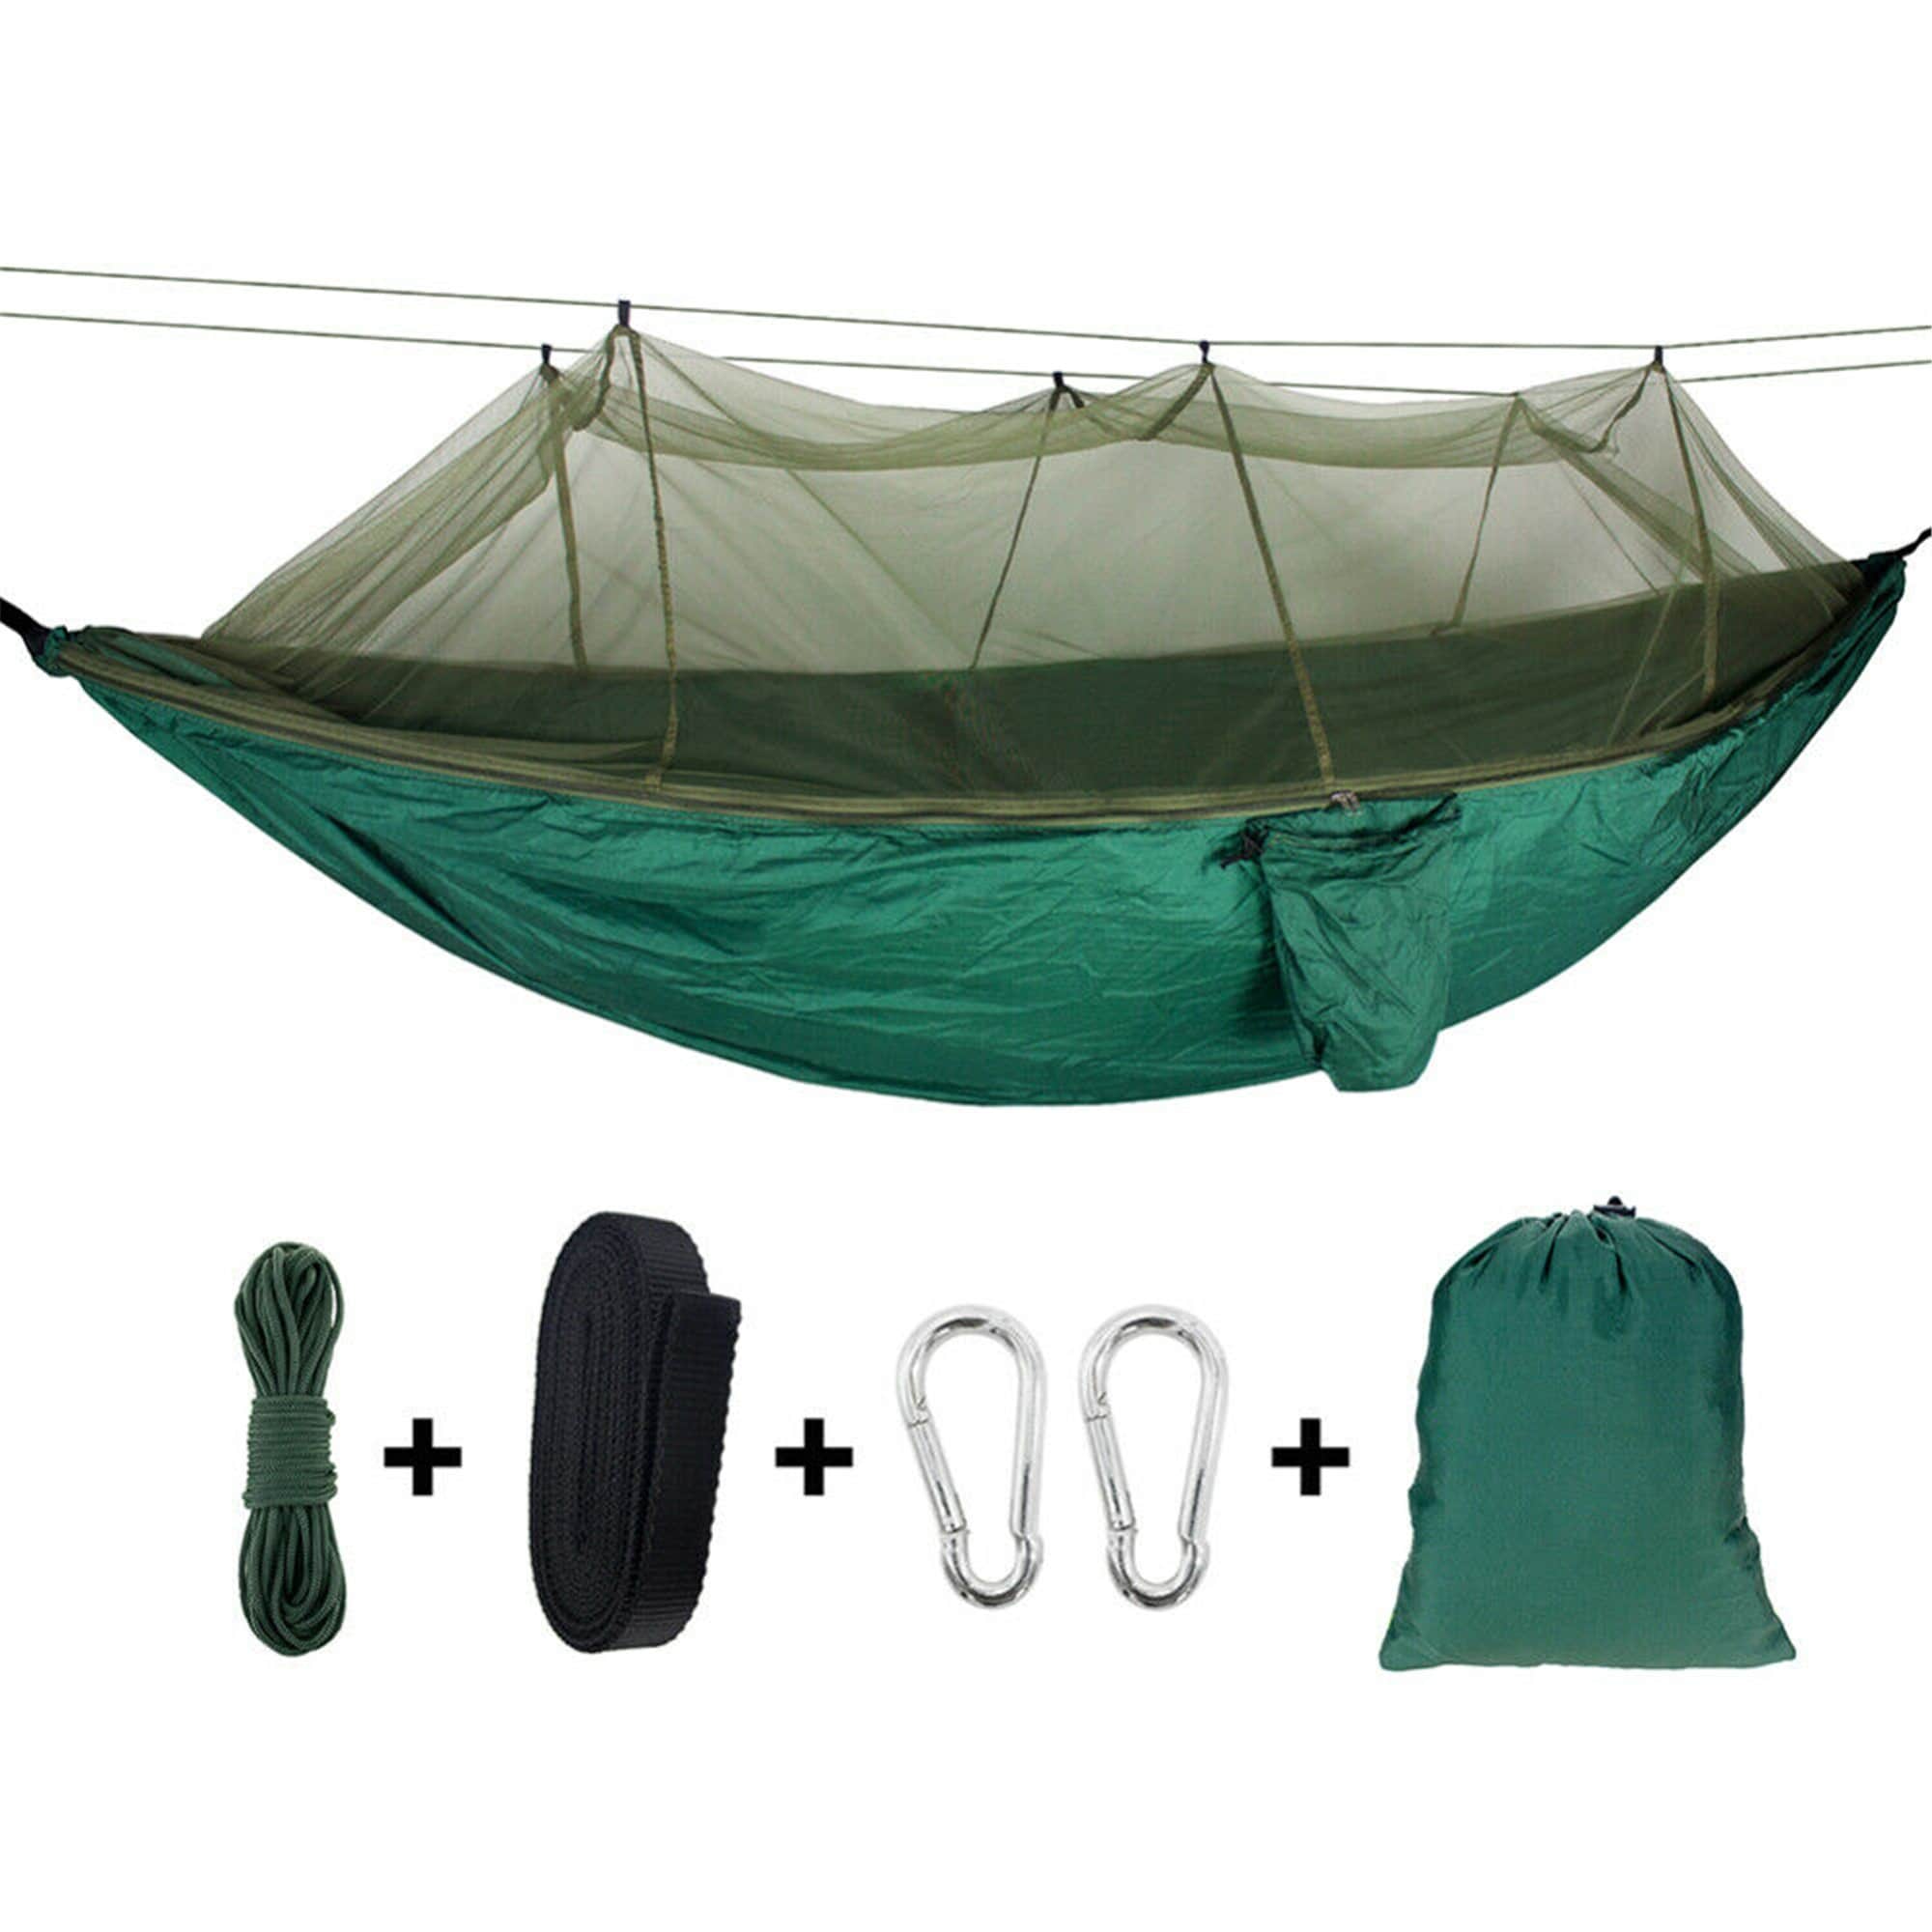 Camping Hammock Tent Mosquito Net Set Outdoor Double Hanging Bed Swing Chair USA 